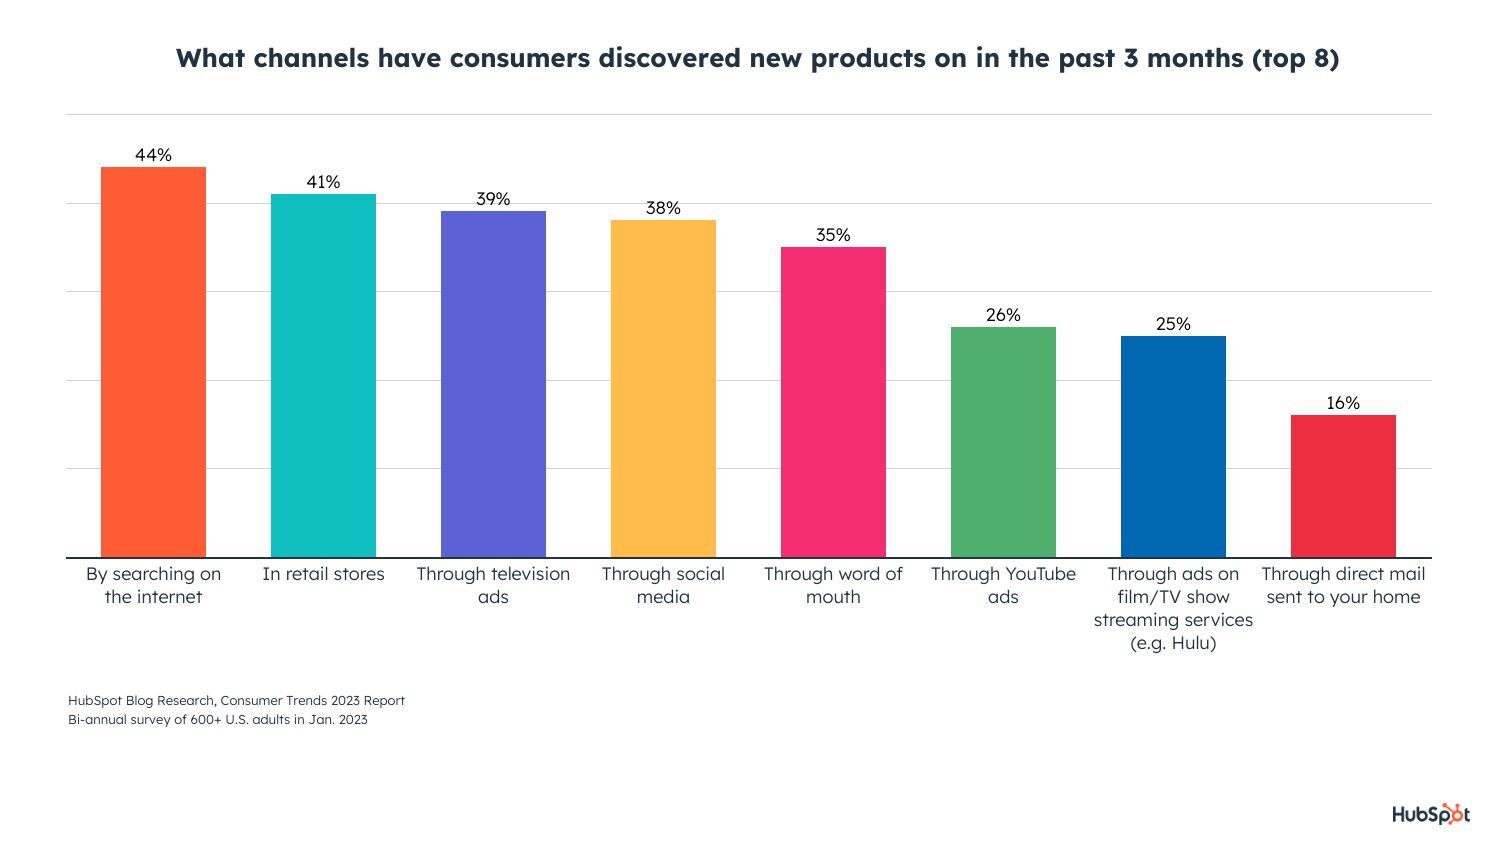 the most popular channels for discovering new products in 2023